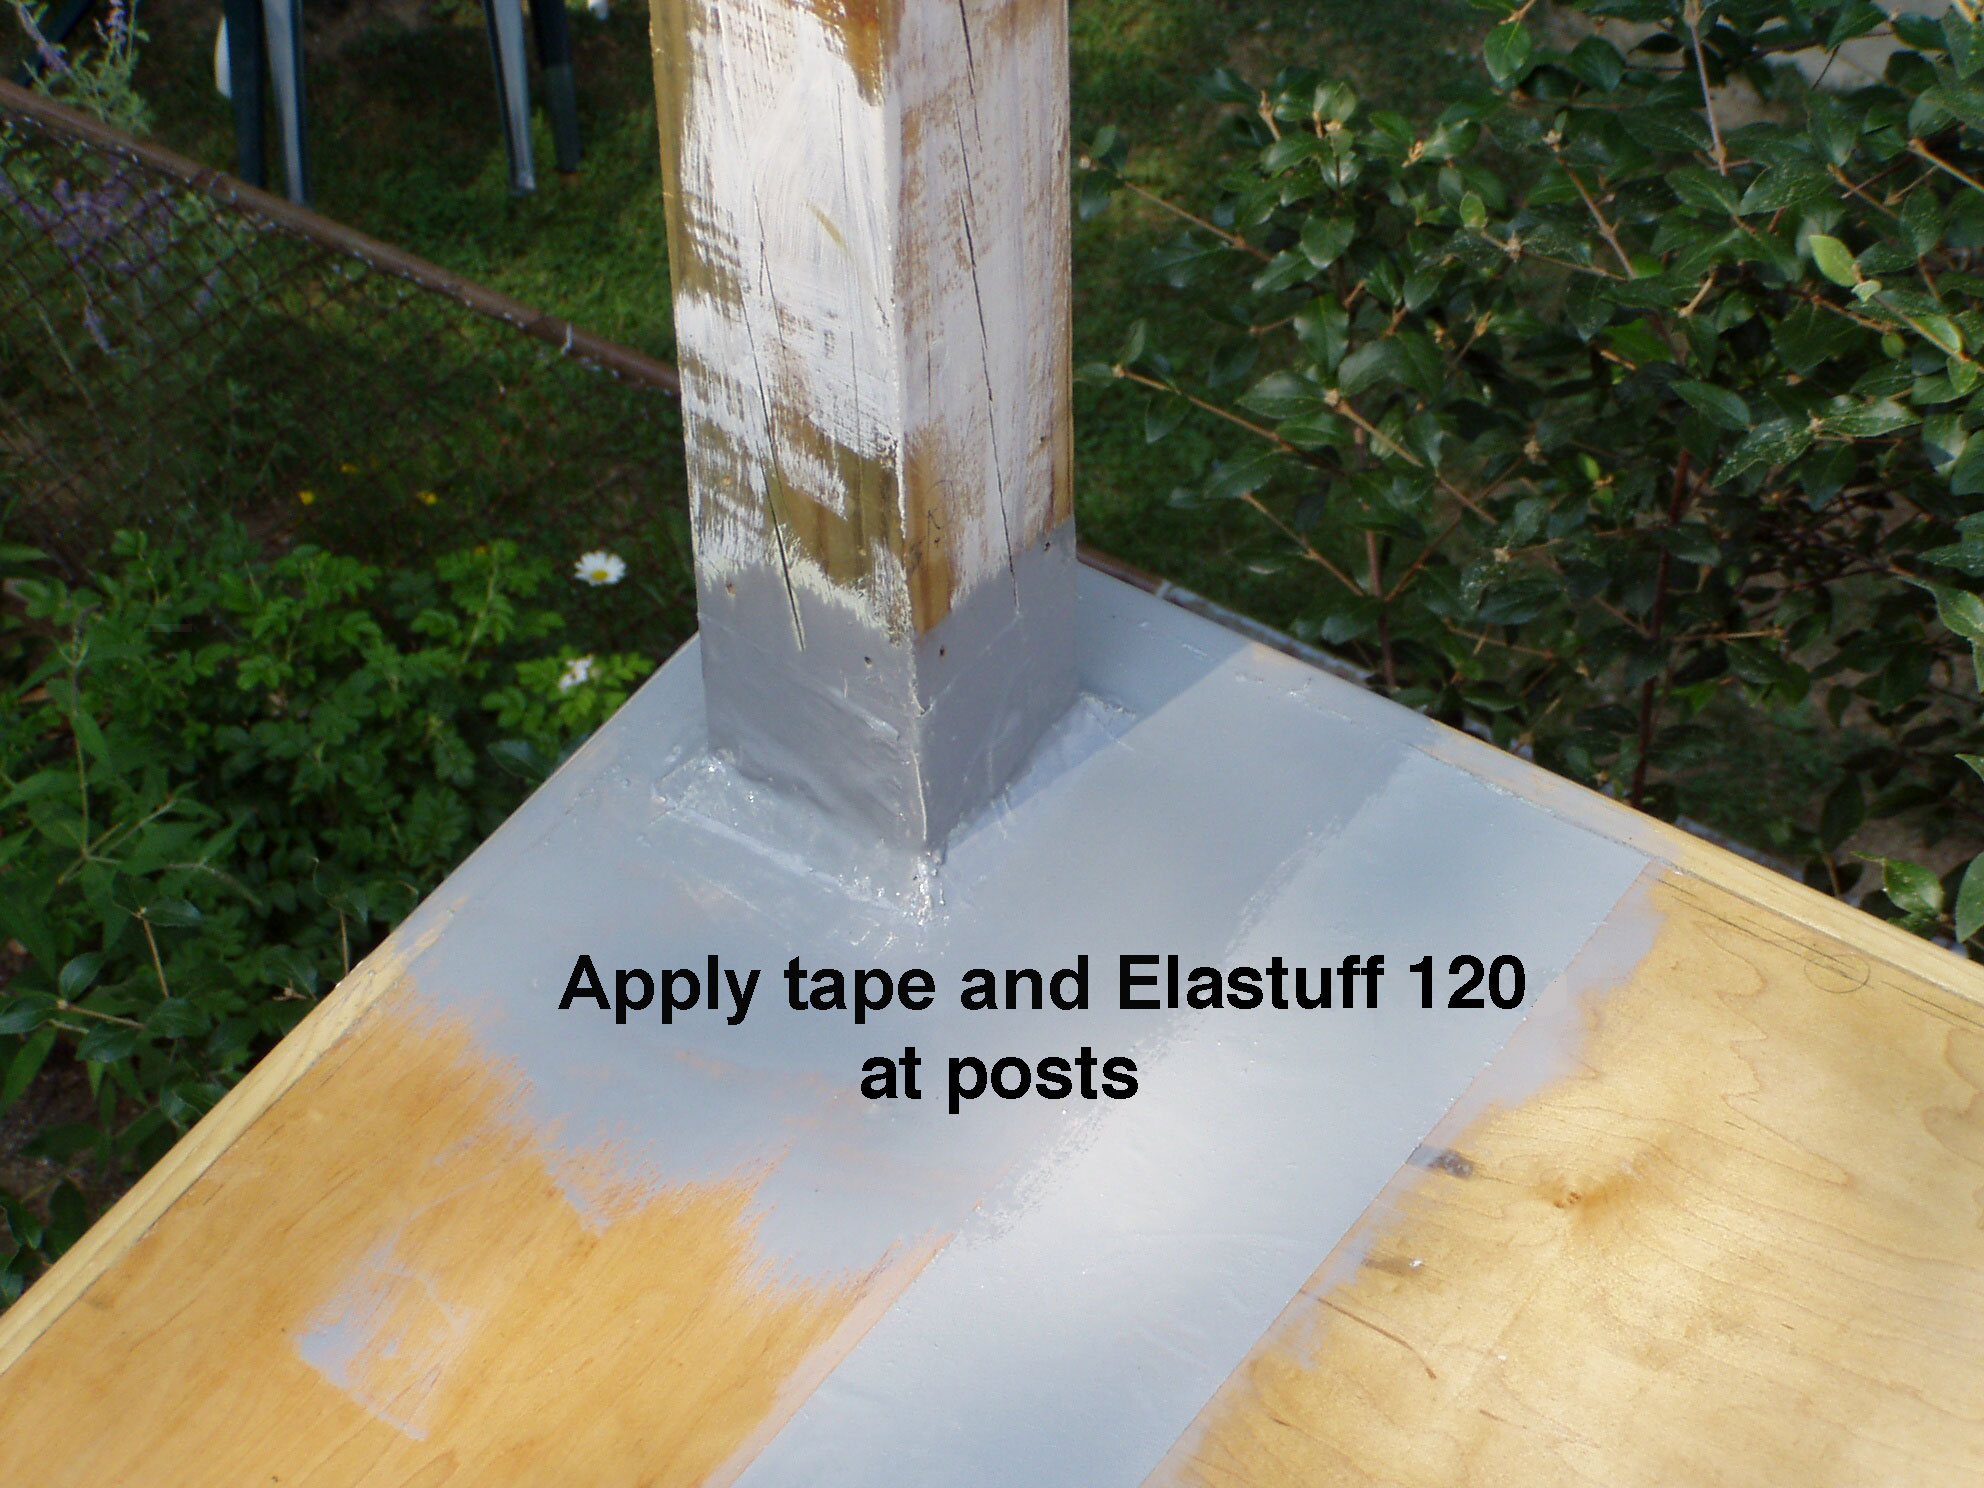 4 inch tape embeded in Elastuff 120 at posts